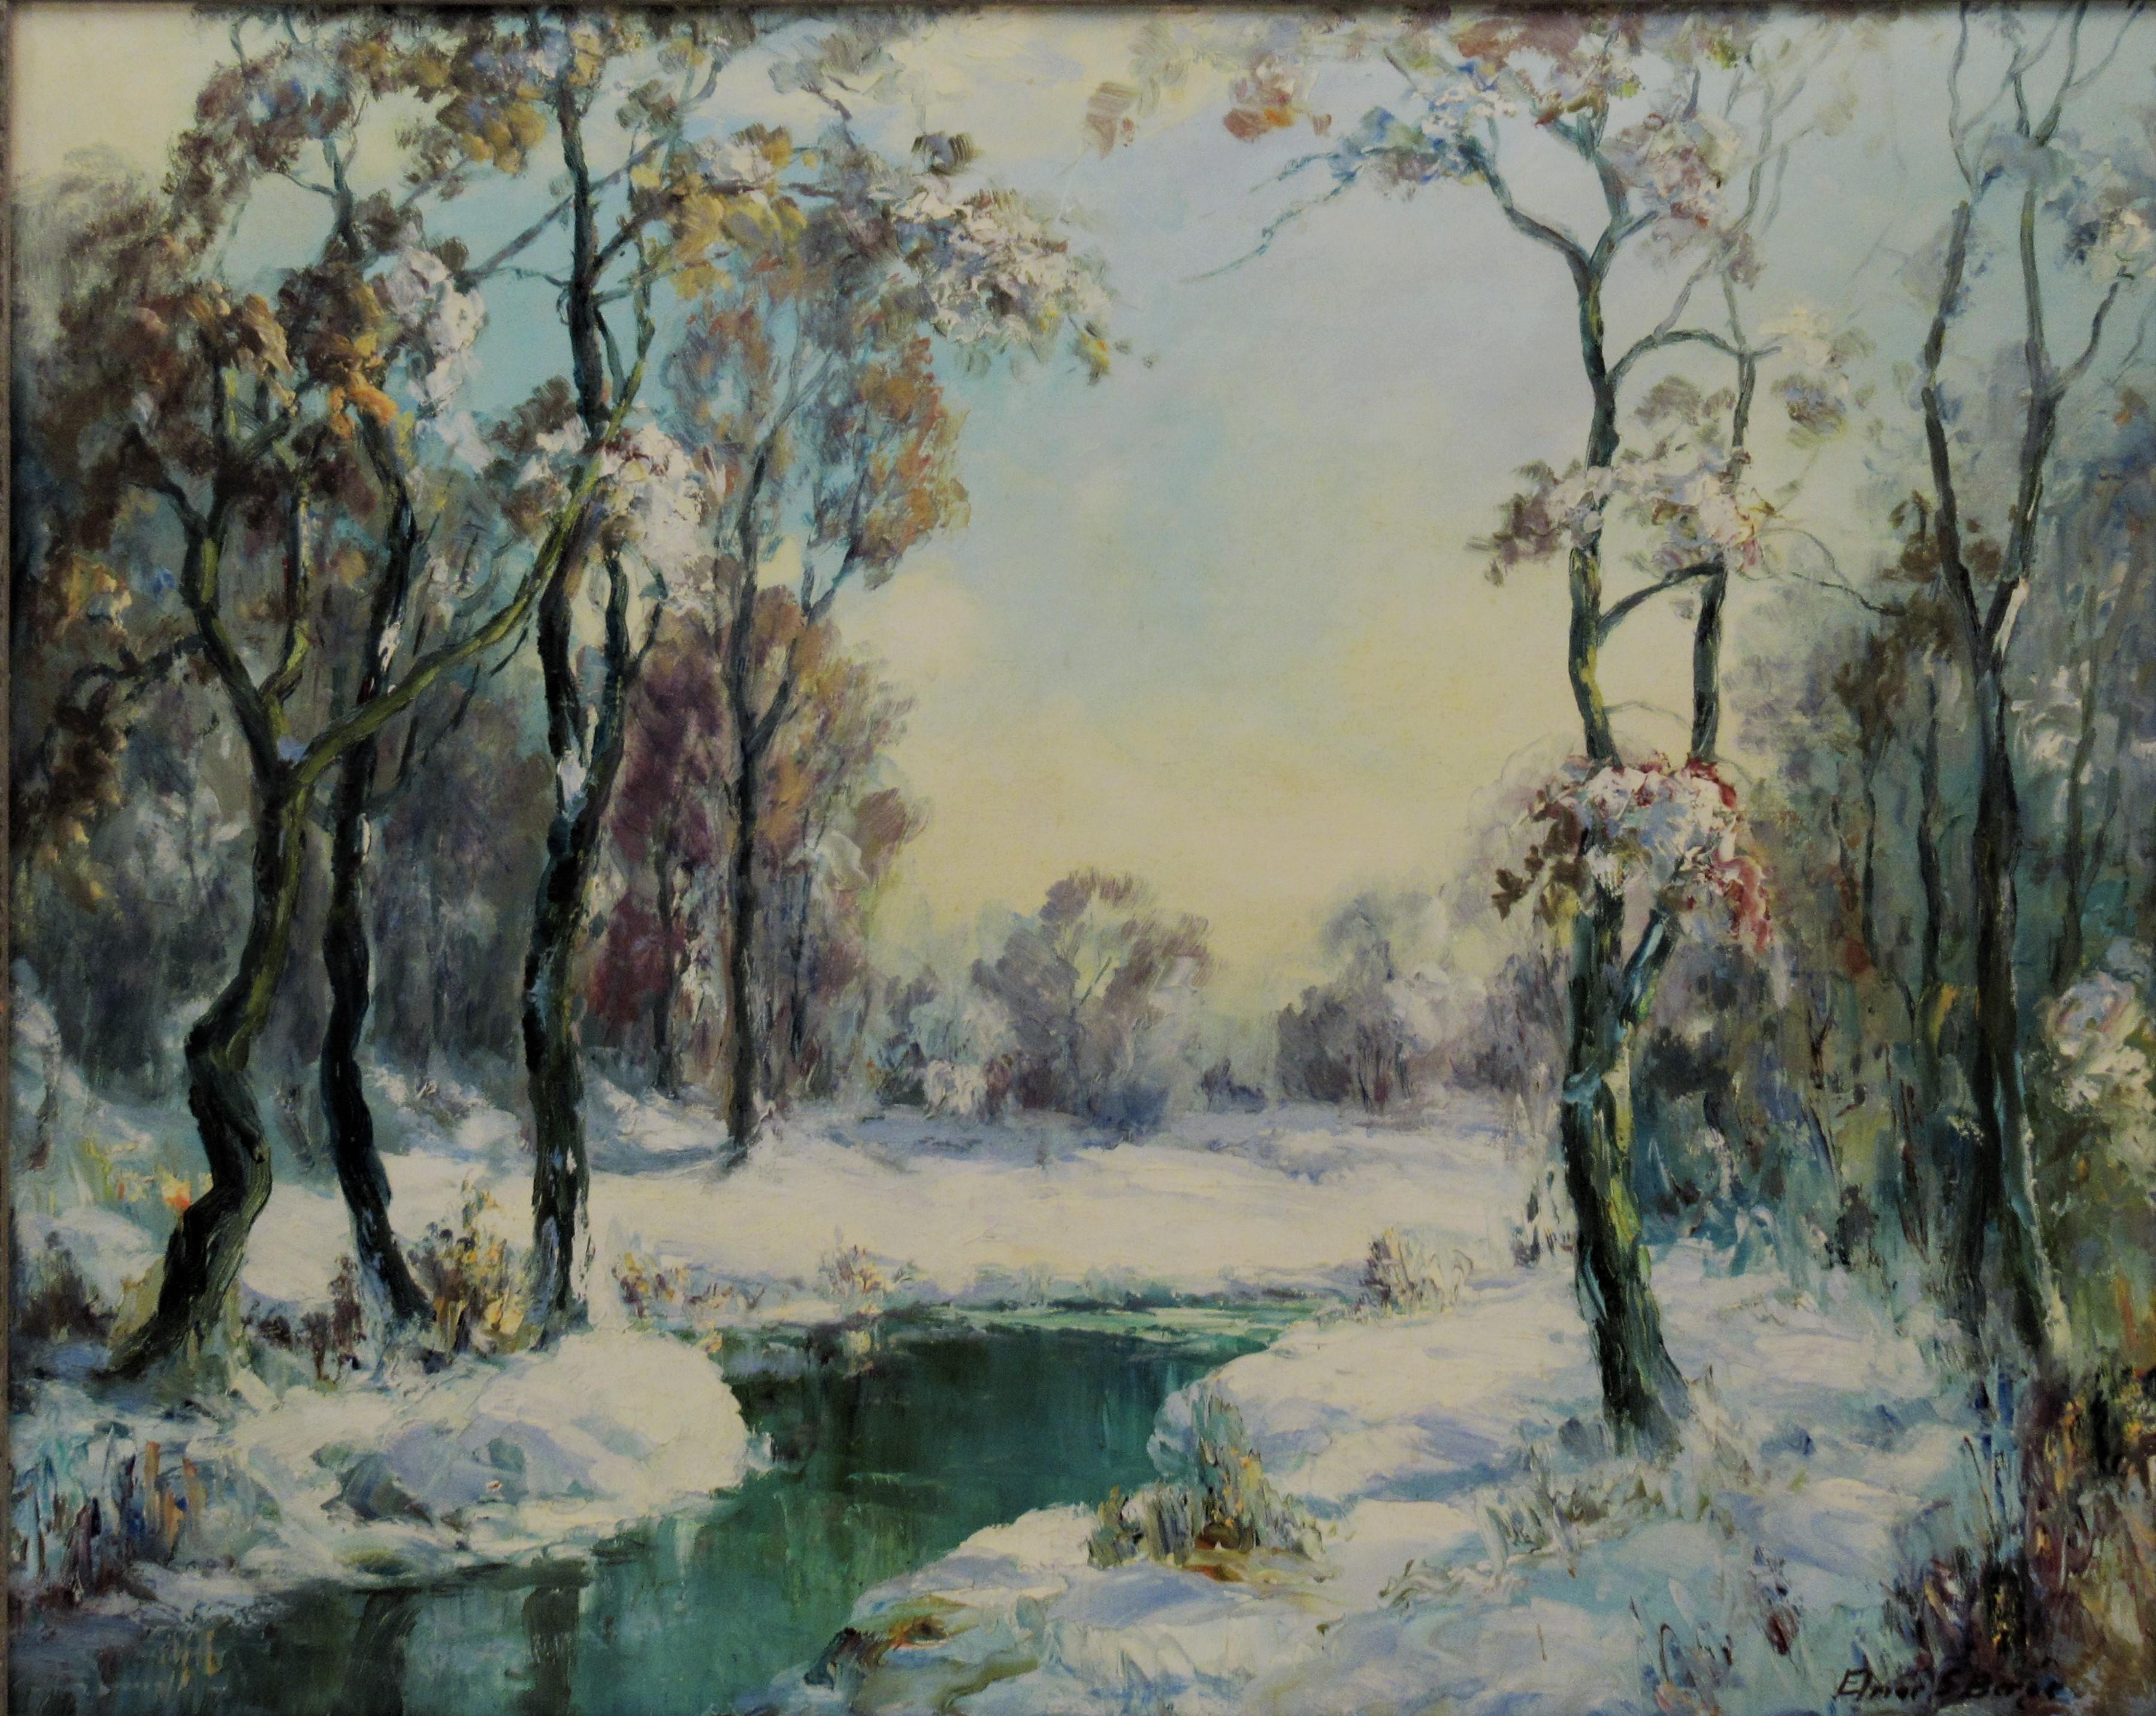 Winter Landscape - Painting by Elmer Berge